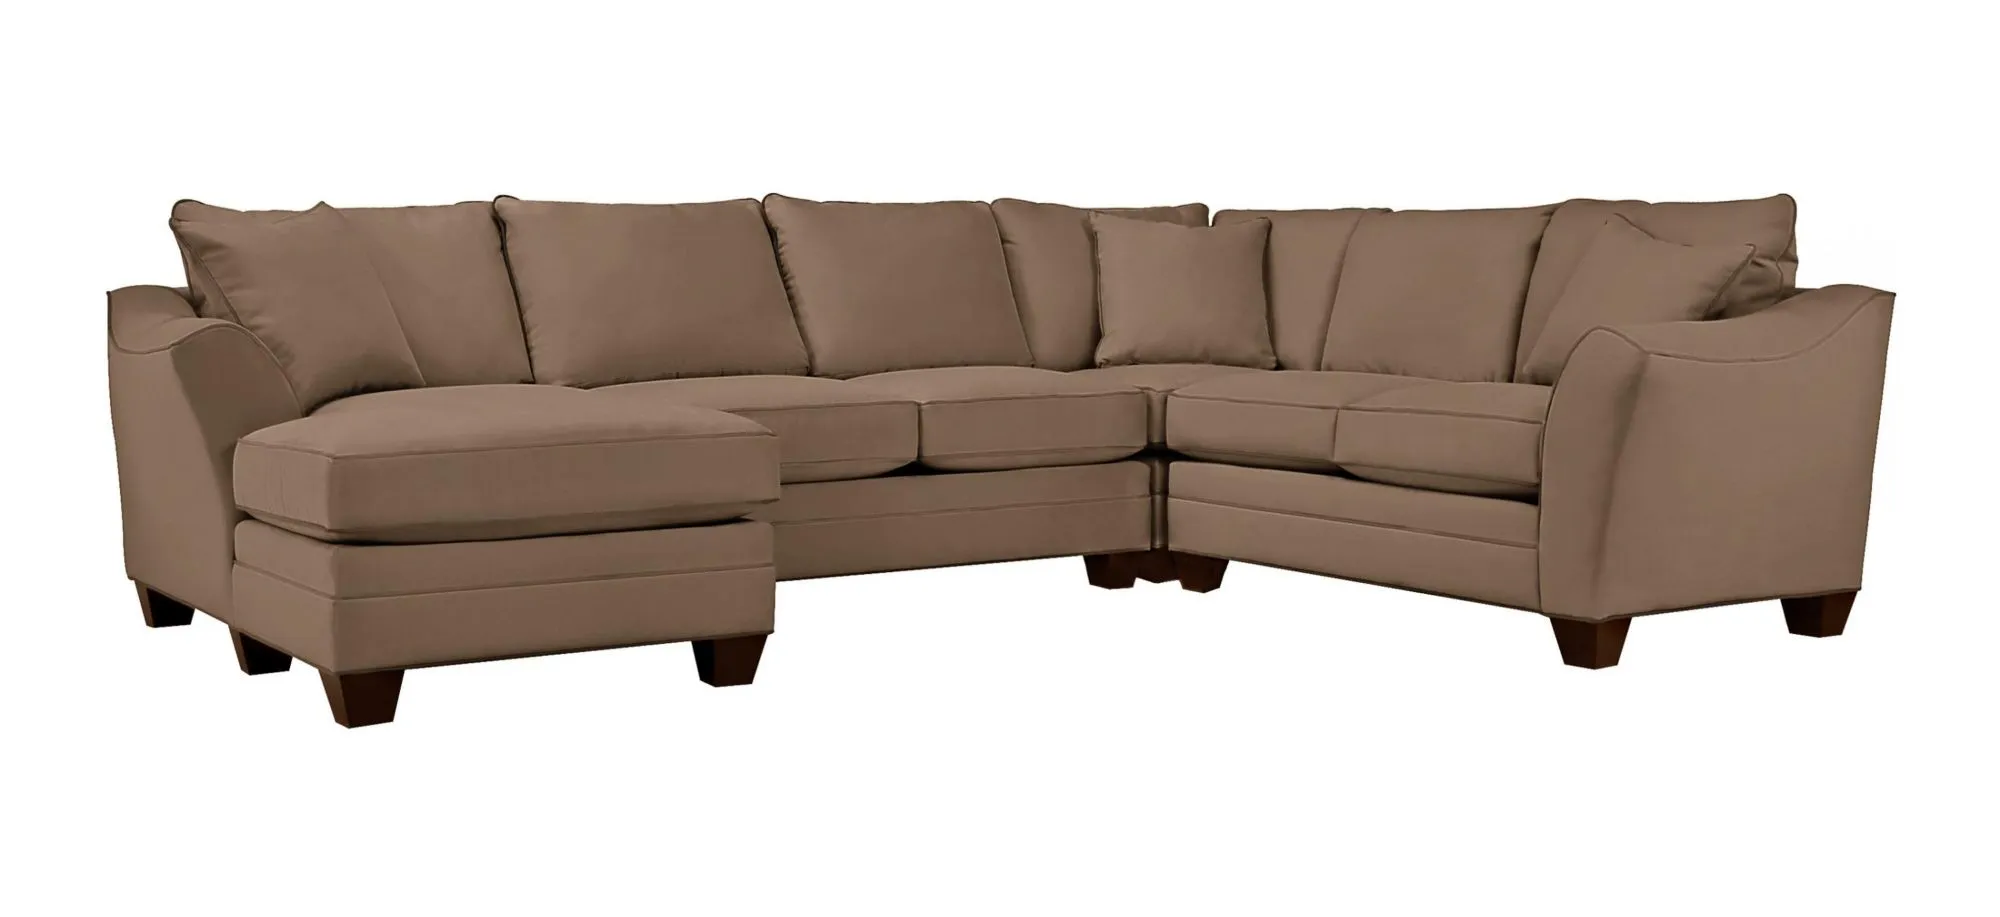 Foresthill 4-pc. Left Hand Chaise Sectional Sofa in Suede So Soft Khaki by H.M. Richards